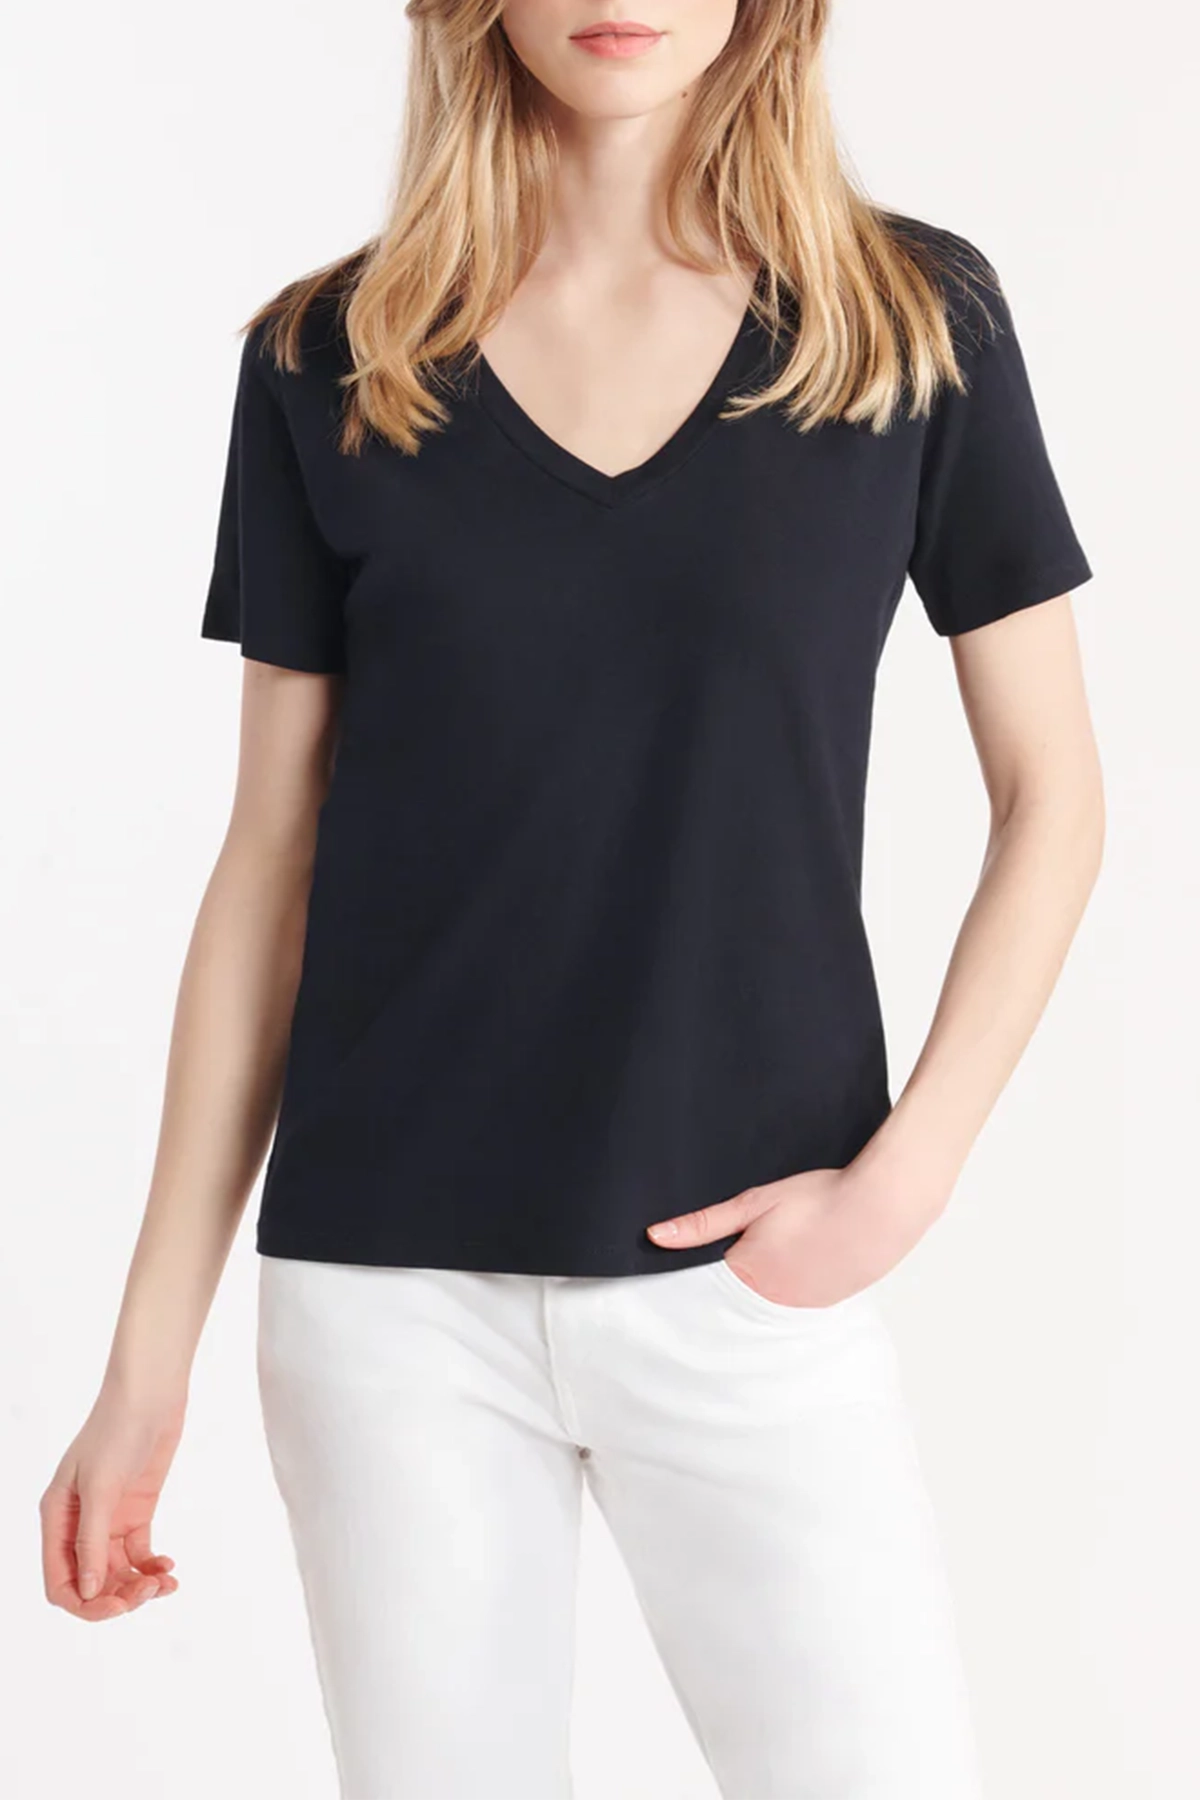 Majestic Filatures Cotton 'Silk Touch' Semi-Relaxed V-Neck T-Shirt